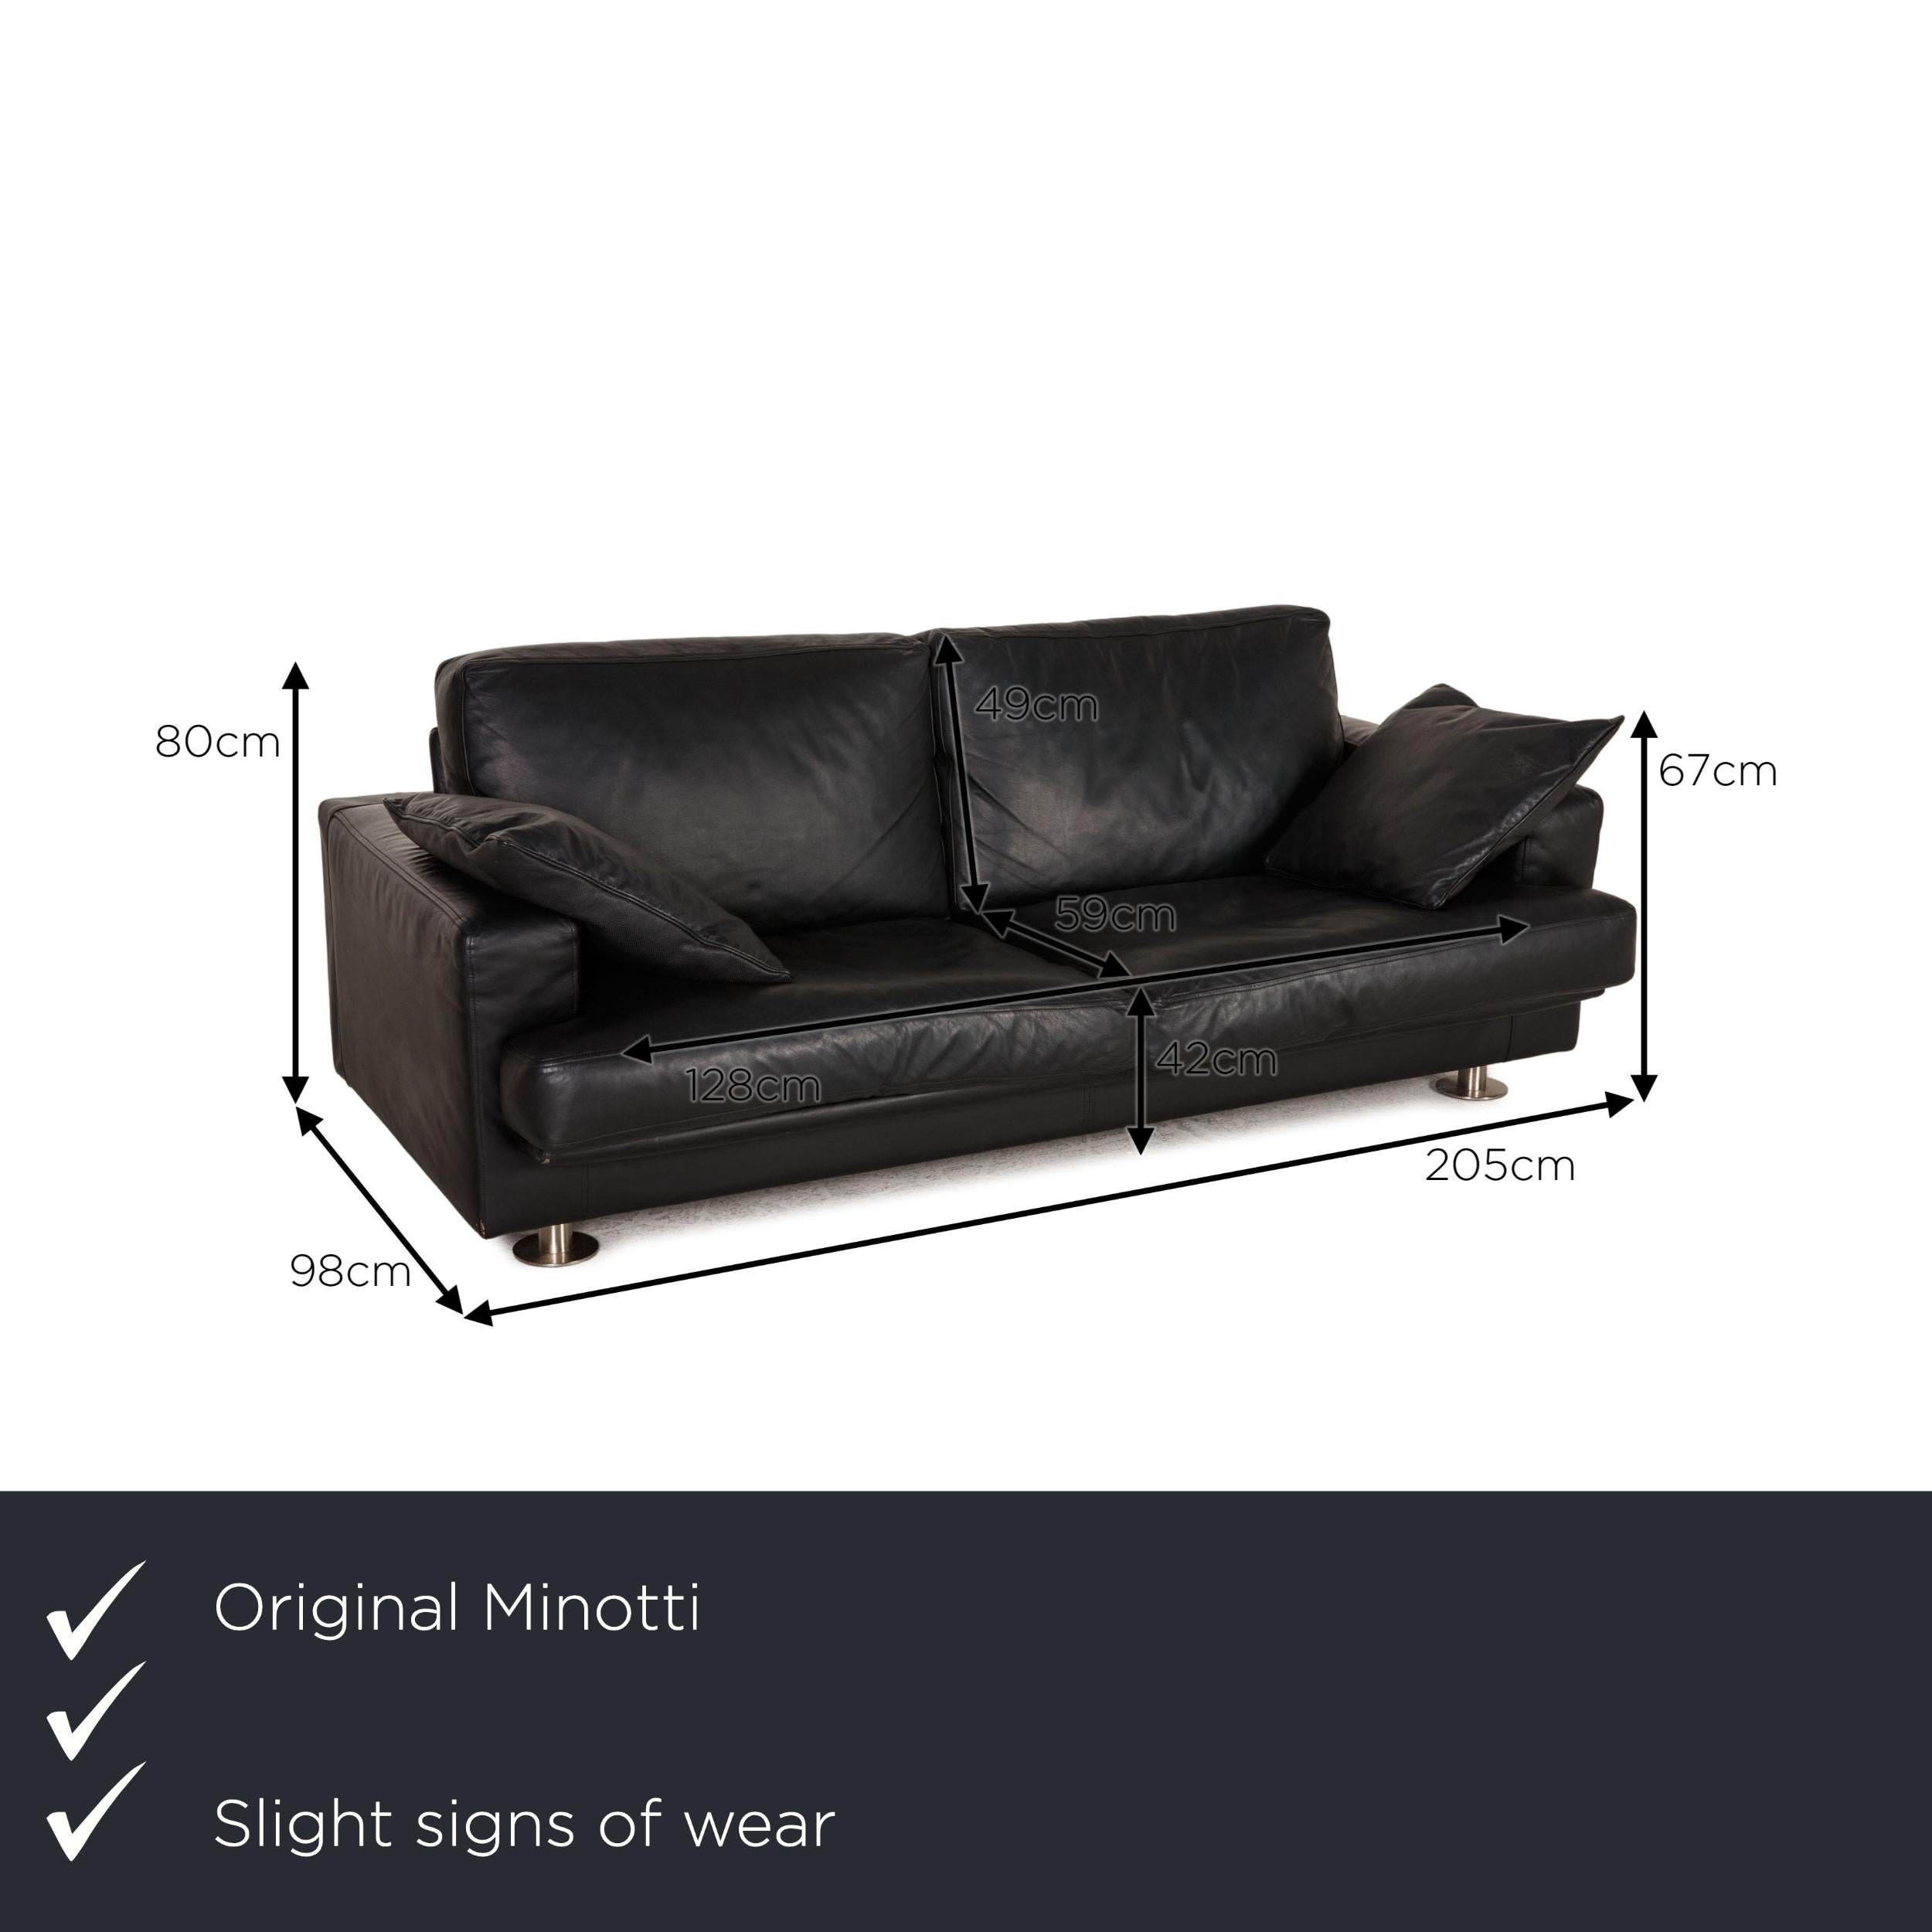 We present to you a Minotti lay down leather sofa black two seater couch.
Product measurements in centimeters:

Measures: depth: 98
width: 205
height: 80
seat height: 42
rest height: 67
seat depth: 59
seat width: 128
back height: 49.


 